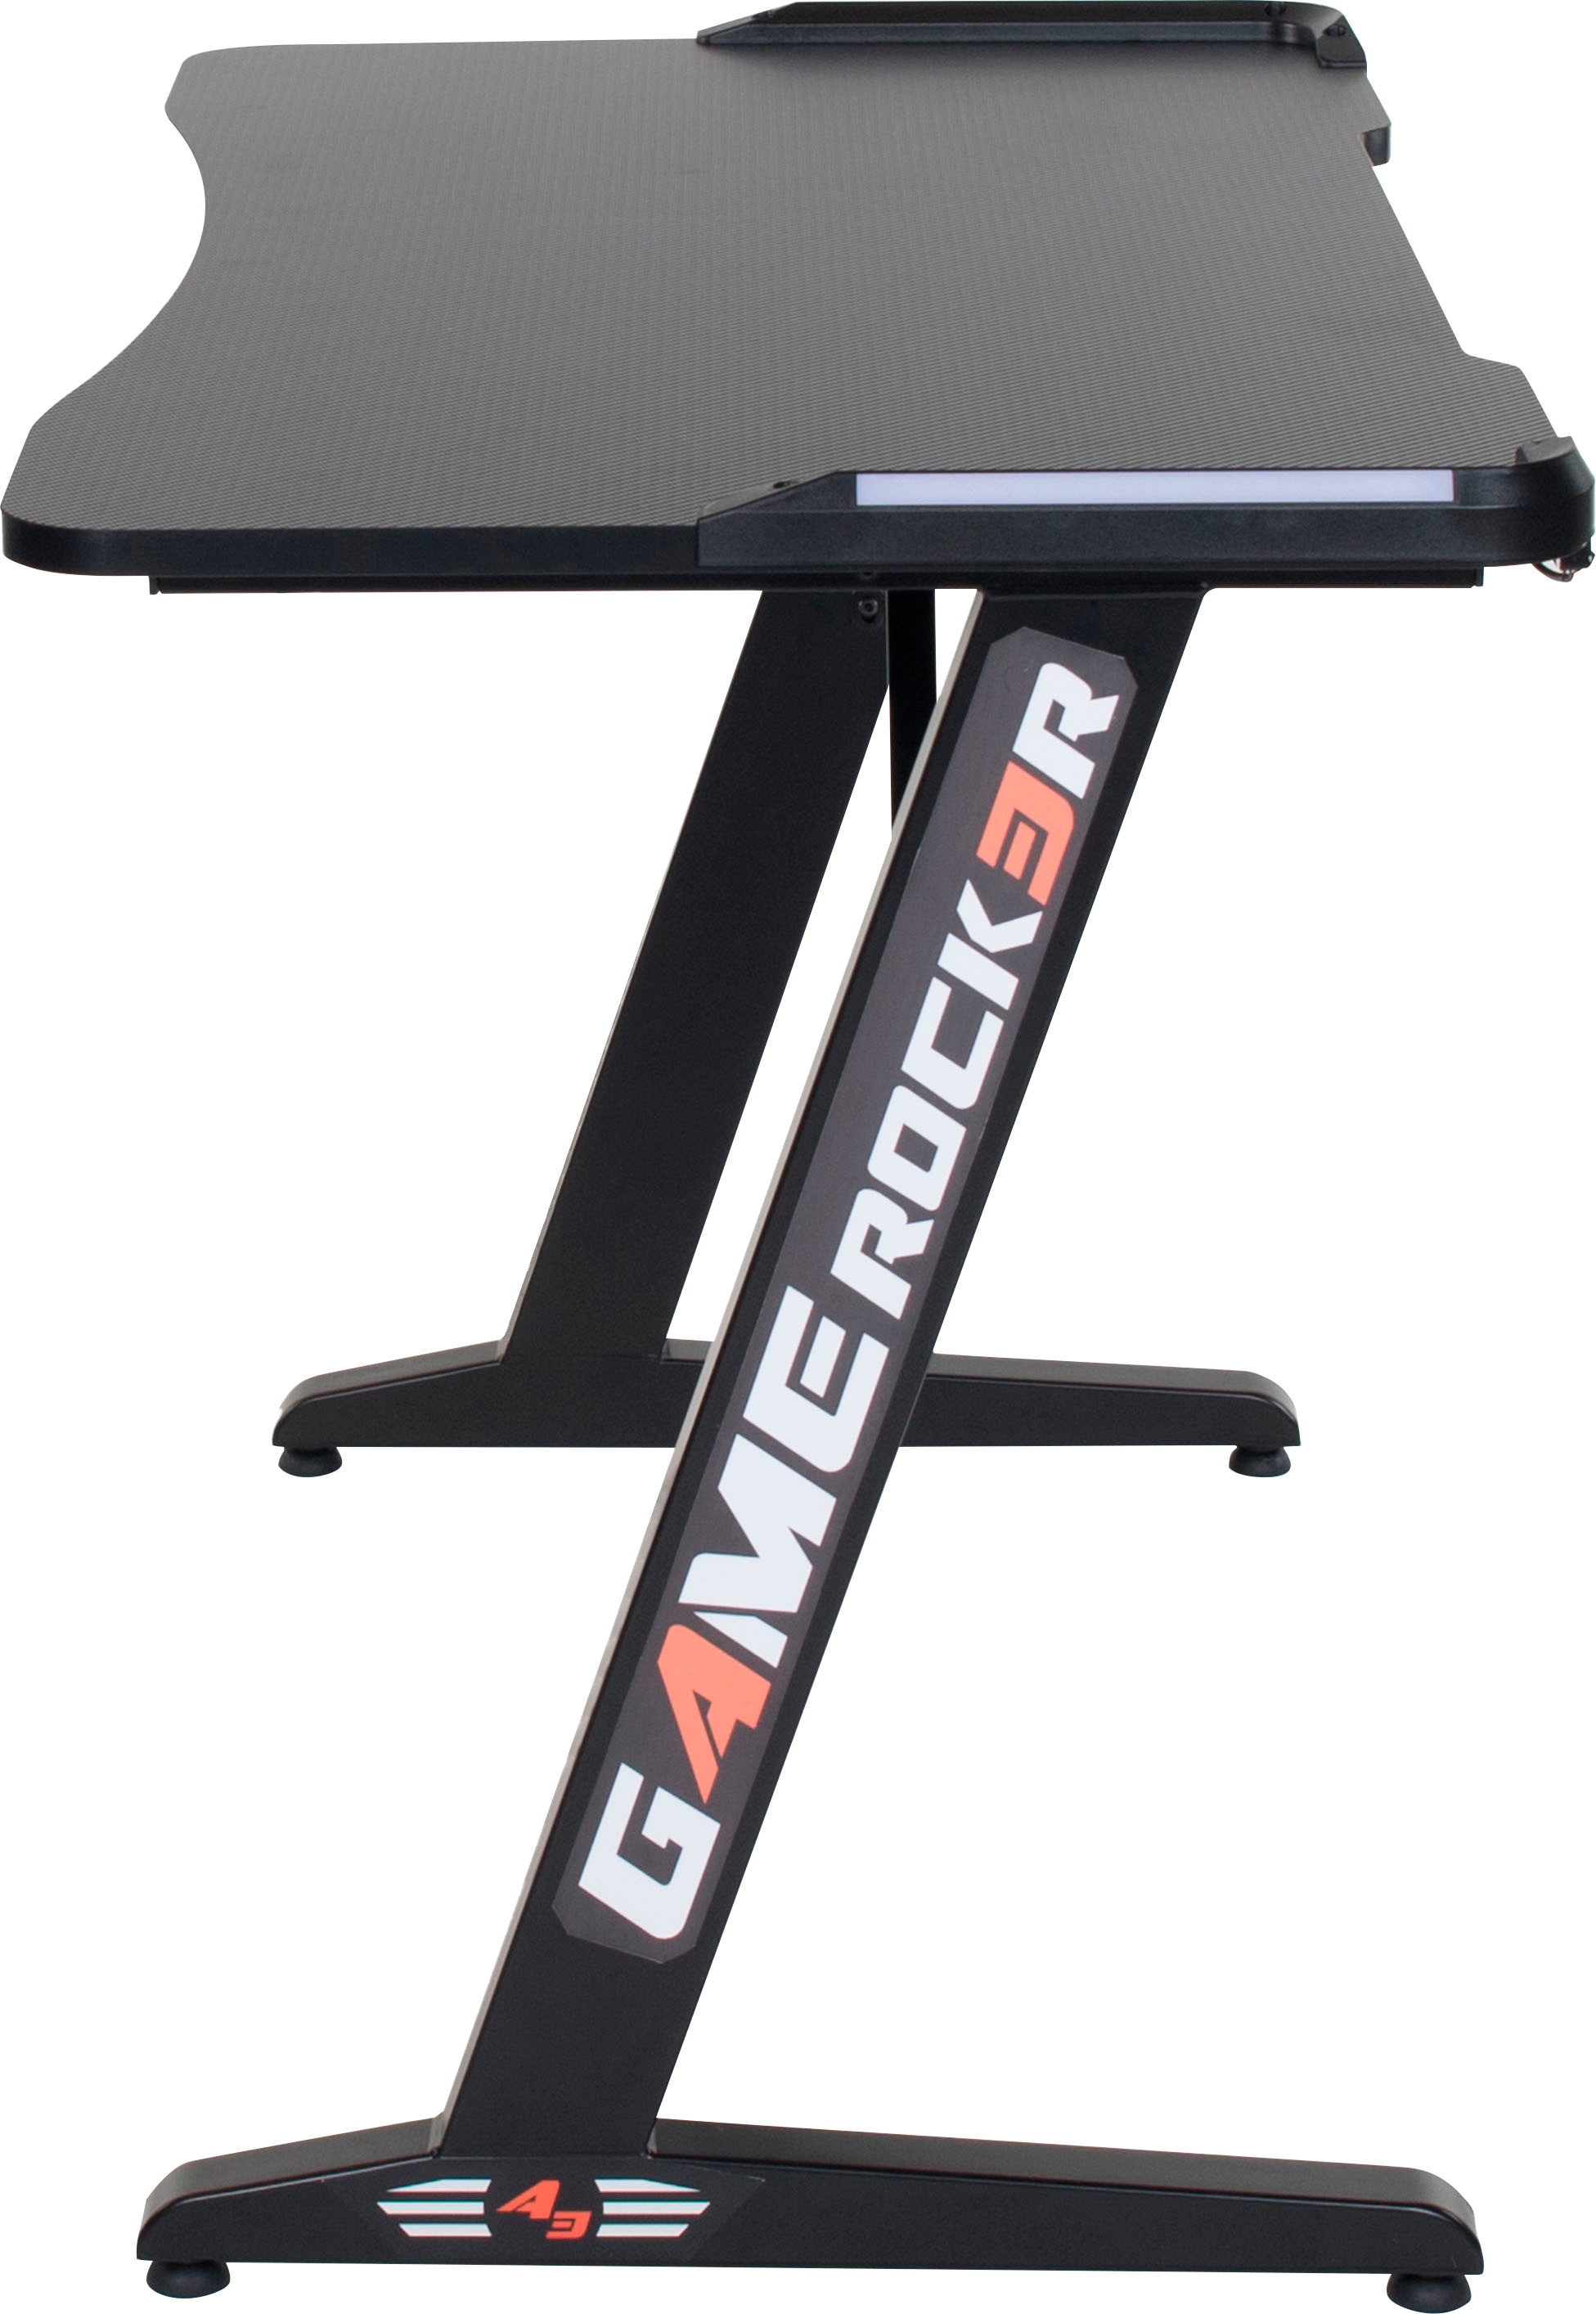 Duo Collection Gamingtisch »Game-Rocker GT-22«, LED-RGB Beleuchtung